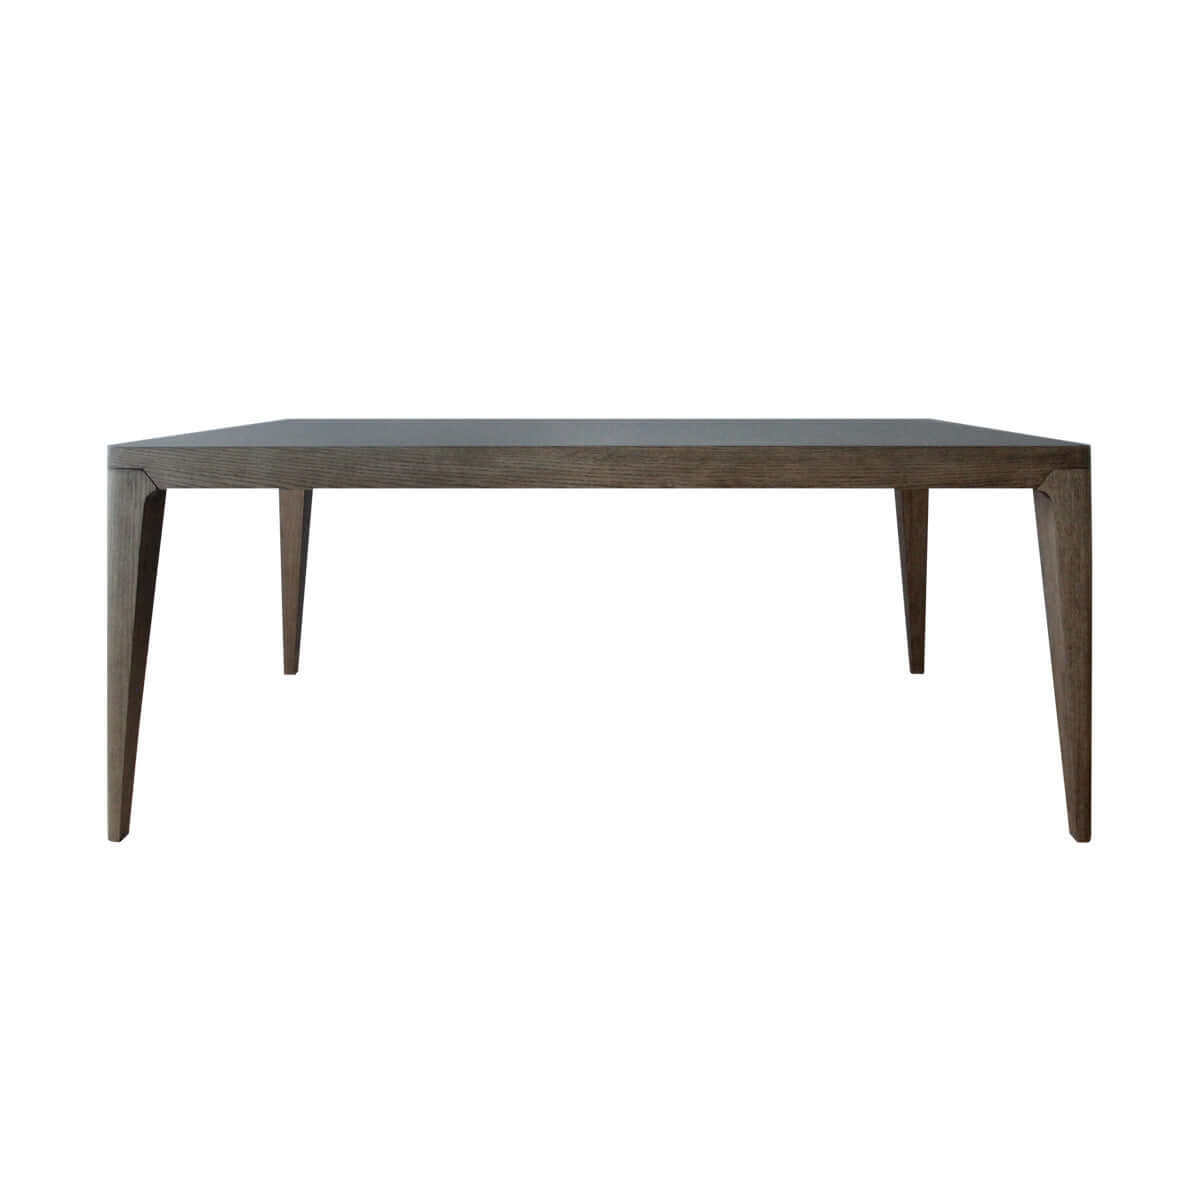 online furniture - contemporary wooden dining table 